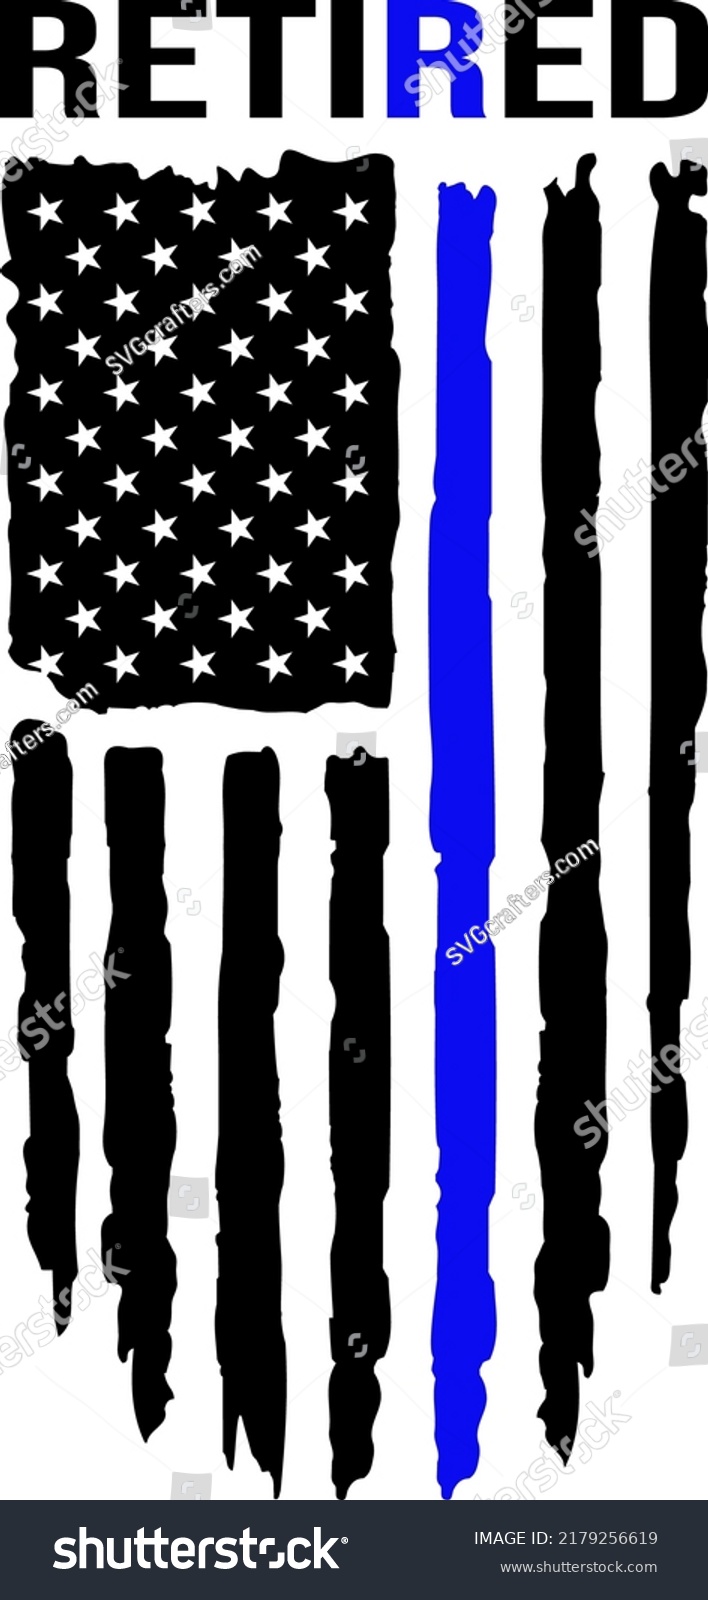 SVG of American Flag Retired Thin Blue Line, Blue Lives Matter, Police Veteran and Retired. svg